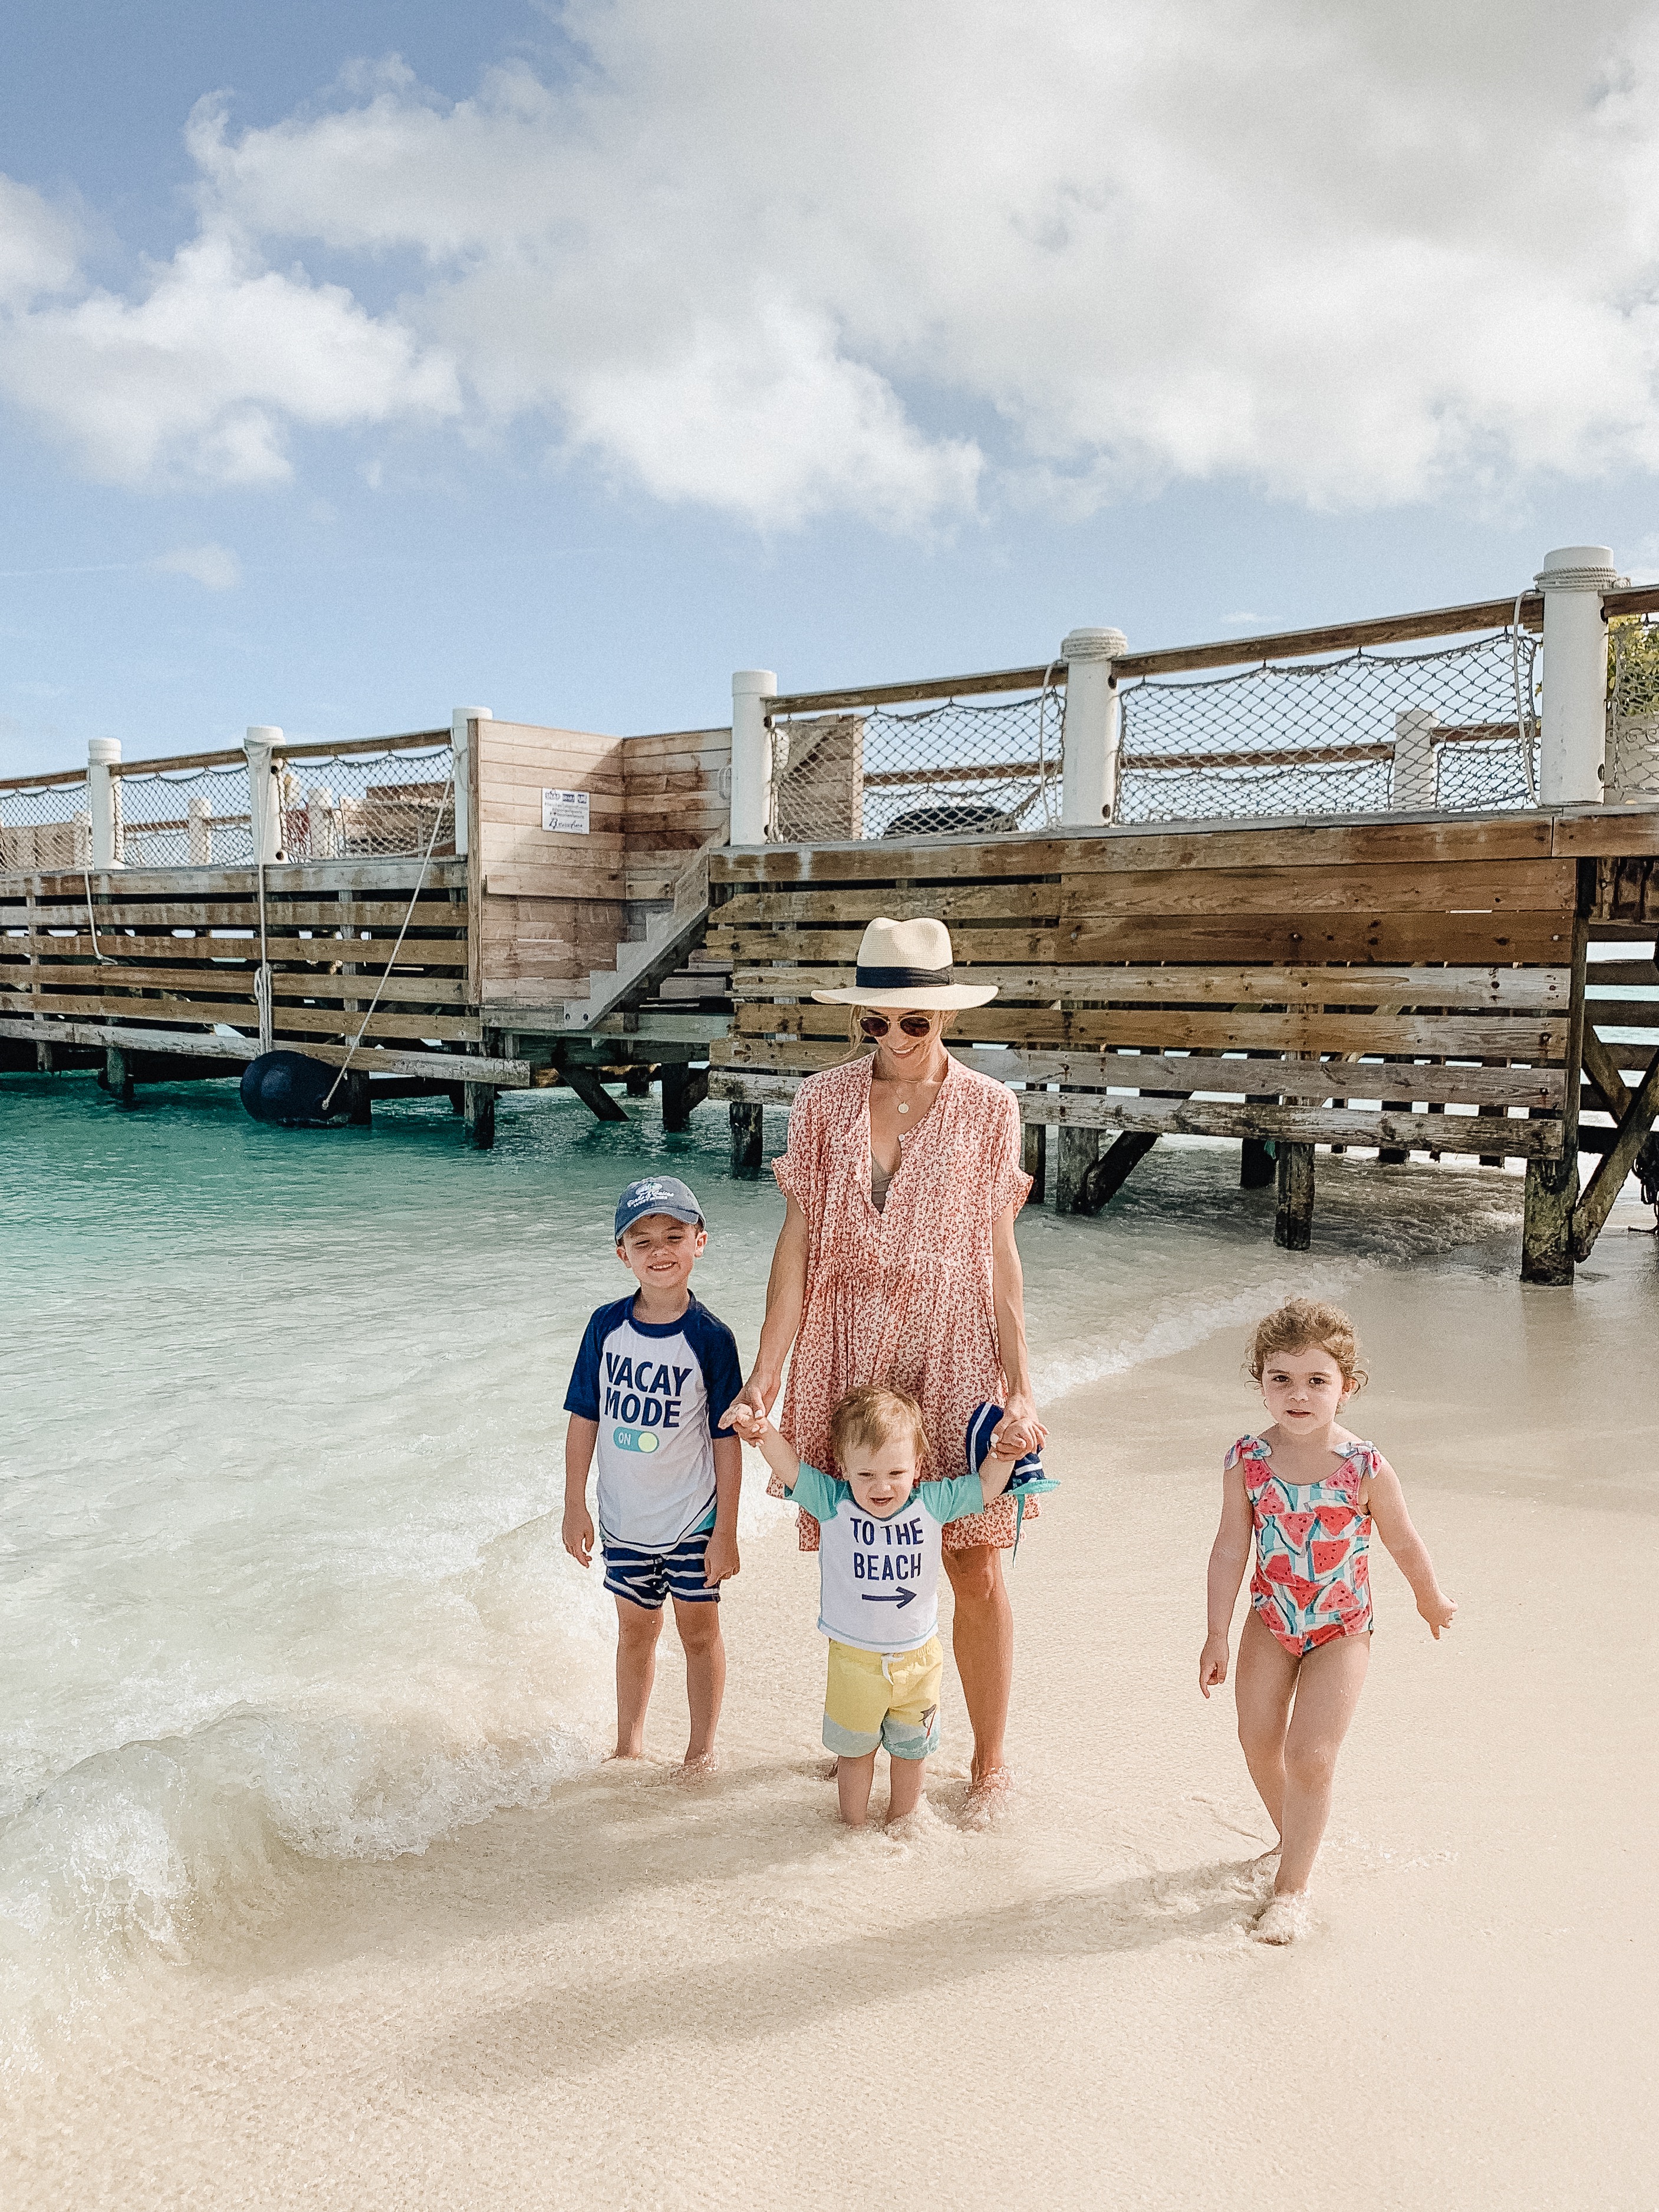 Connecticut life and style blogger Lauren McBride shares a Turks & Caicos outfit roundup, including dresses, coverups, and bathing suits.